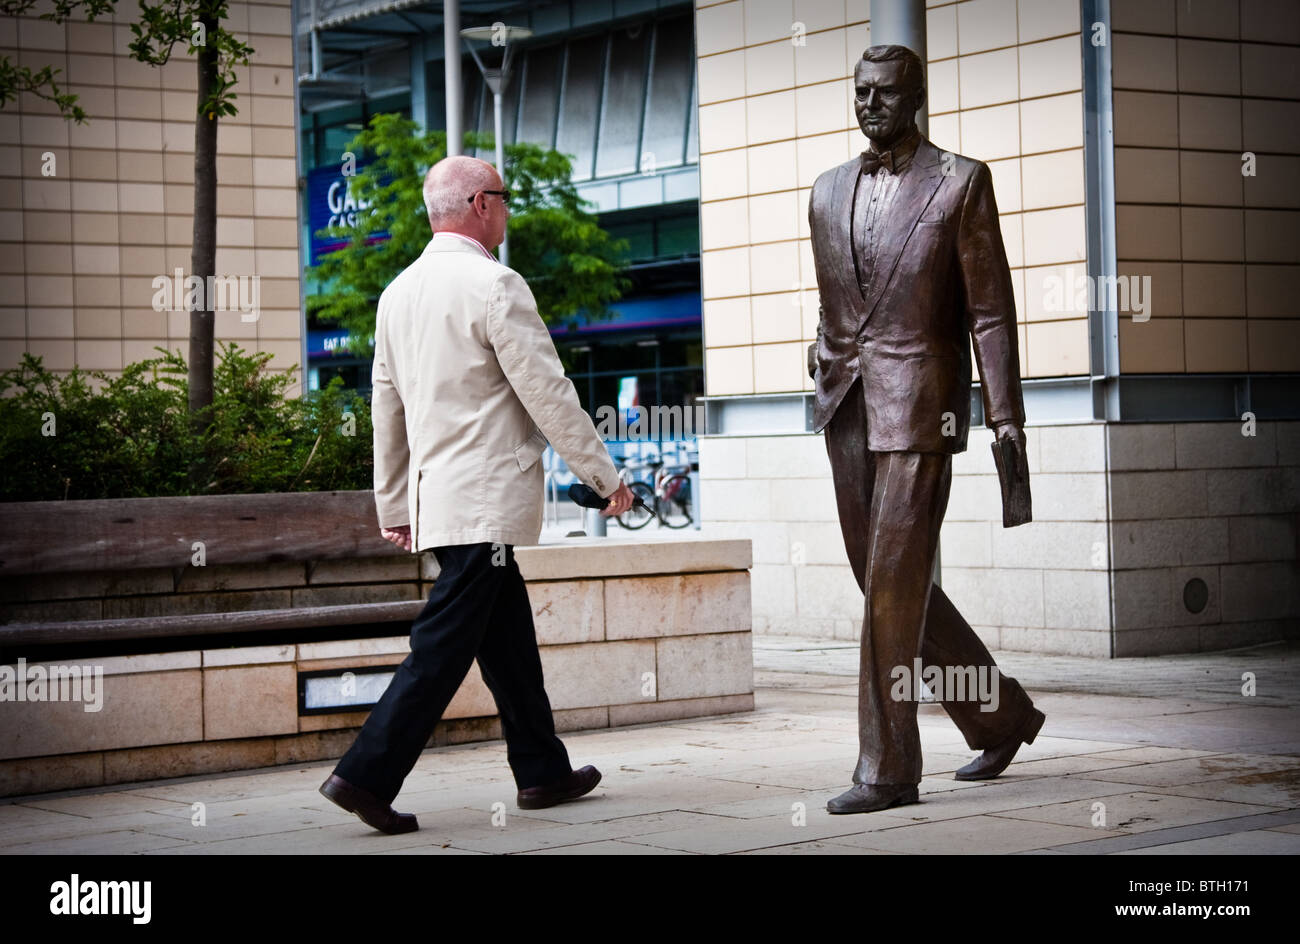 Man mimicking the statue of Cary Grant Stock Photo